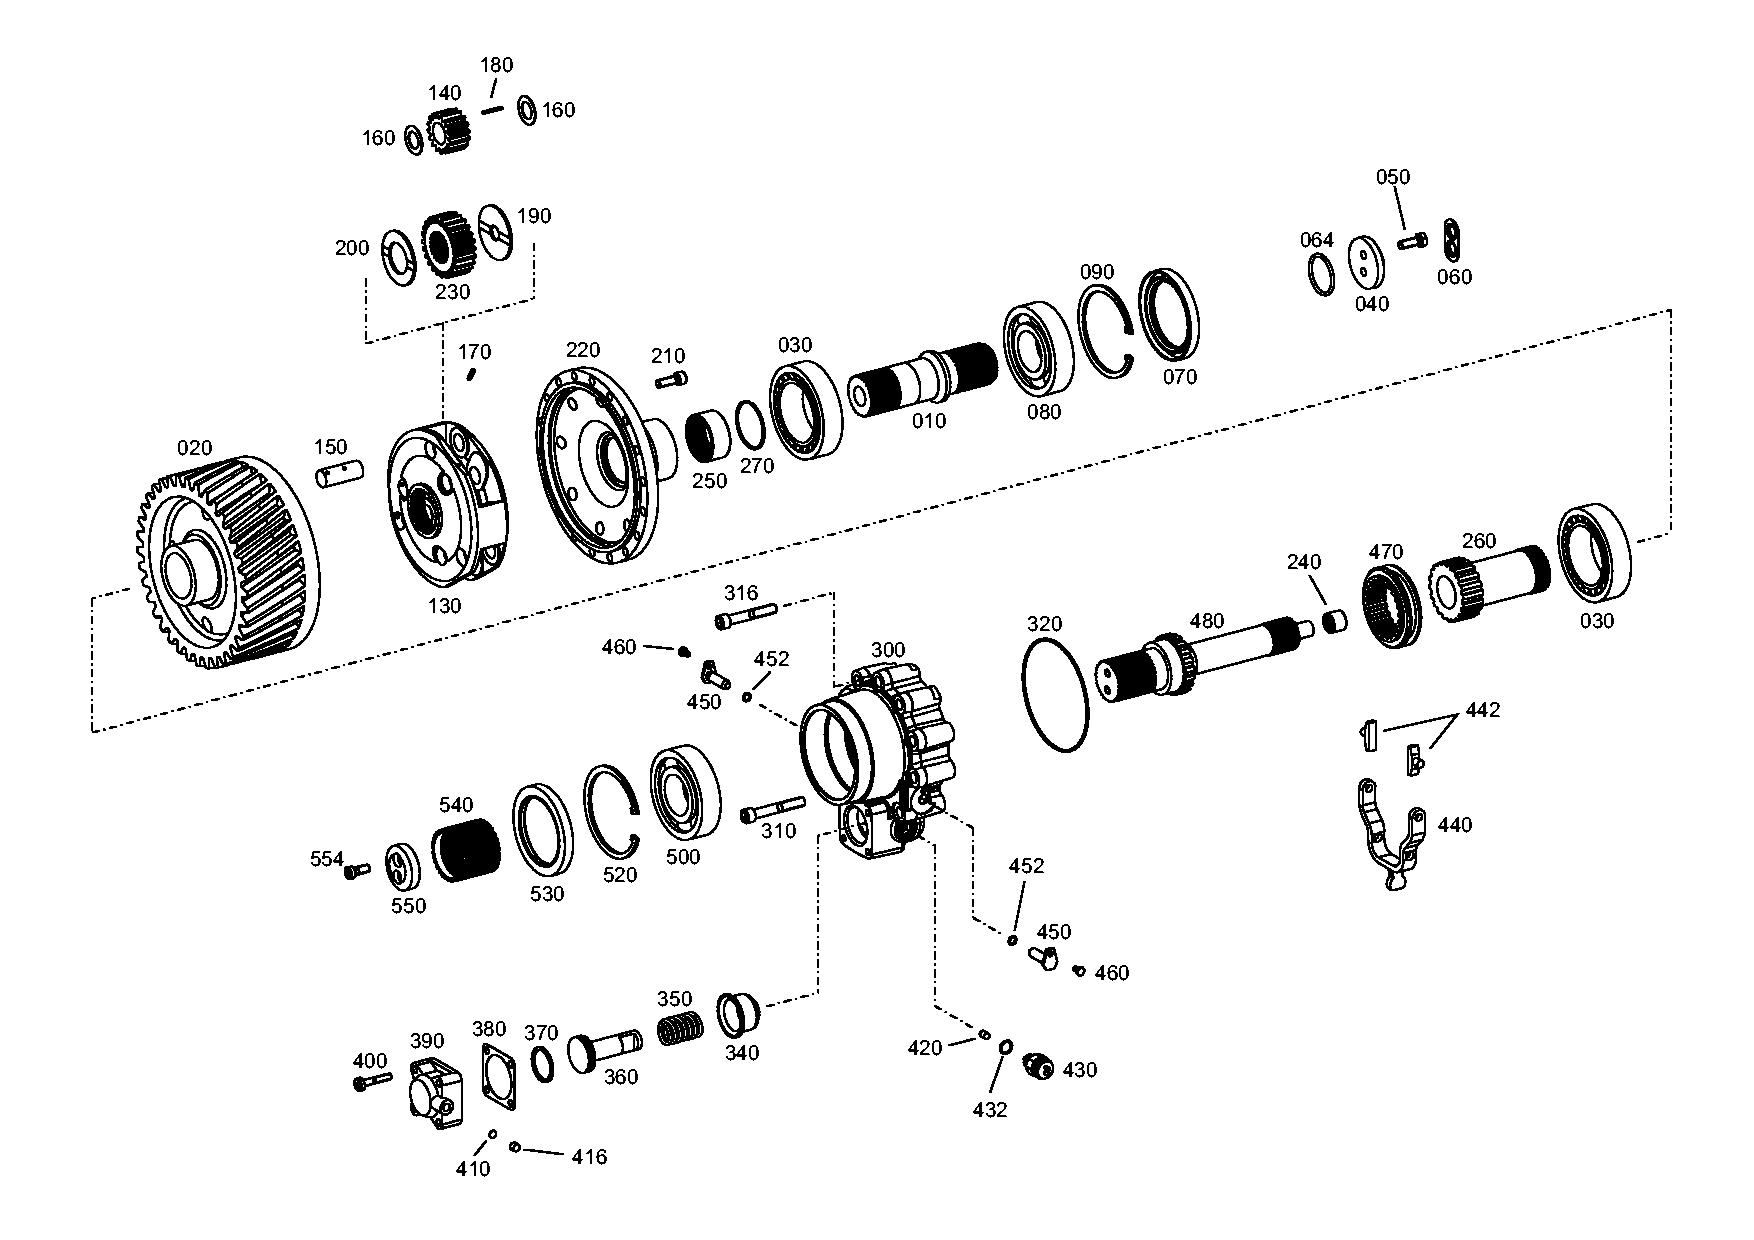 drawing for BERGMANN_MB 800231140900 - SWITCH (figure 4)